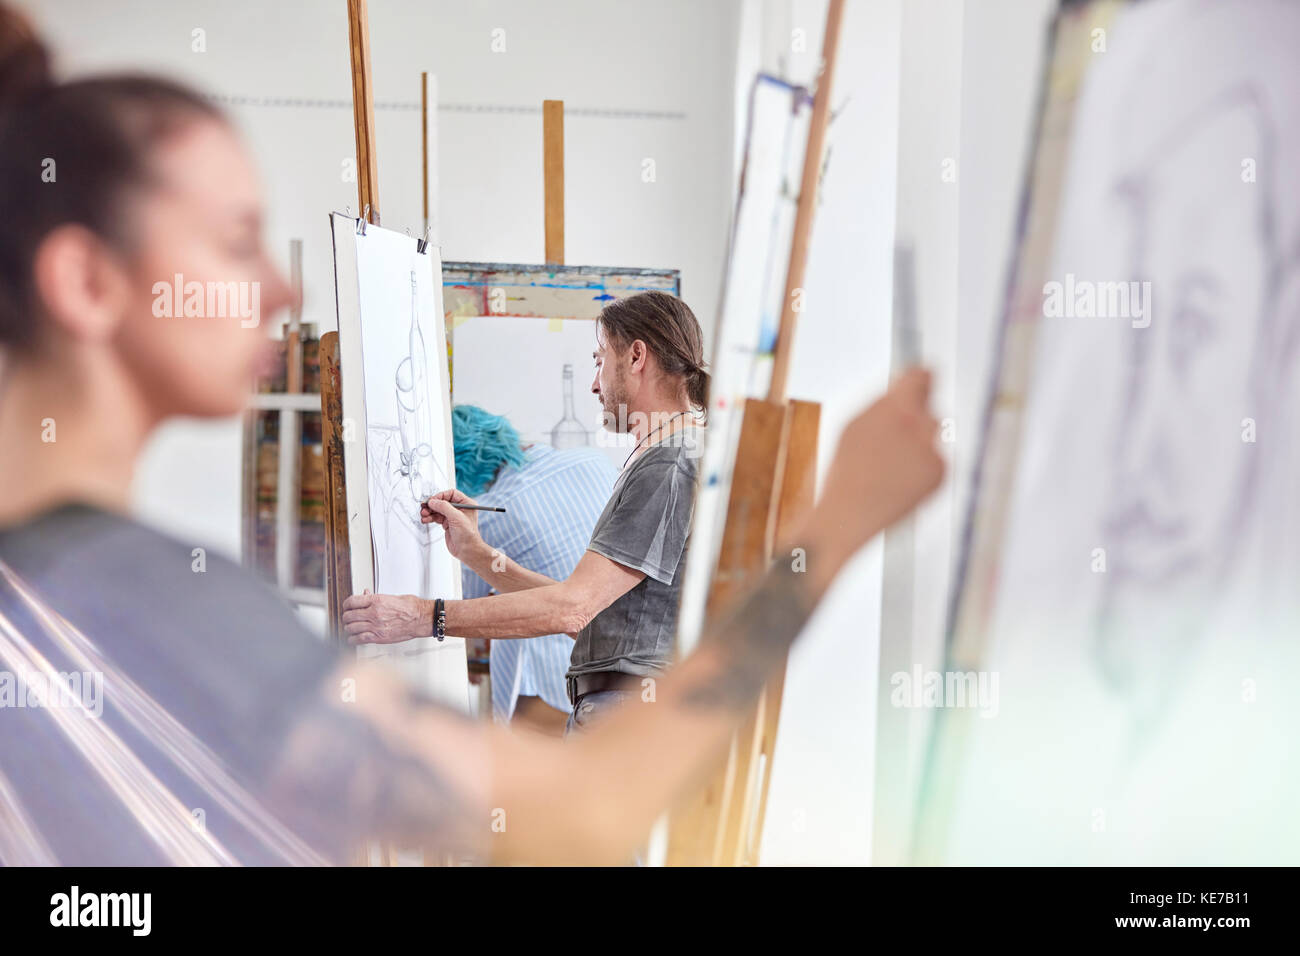 Artists sketching at easels in art class studio Stock Photo